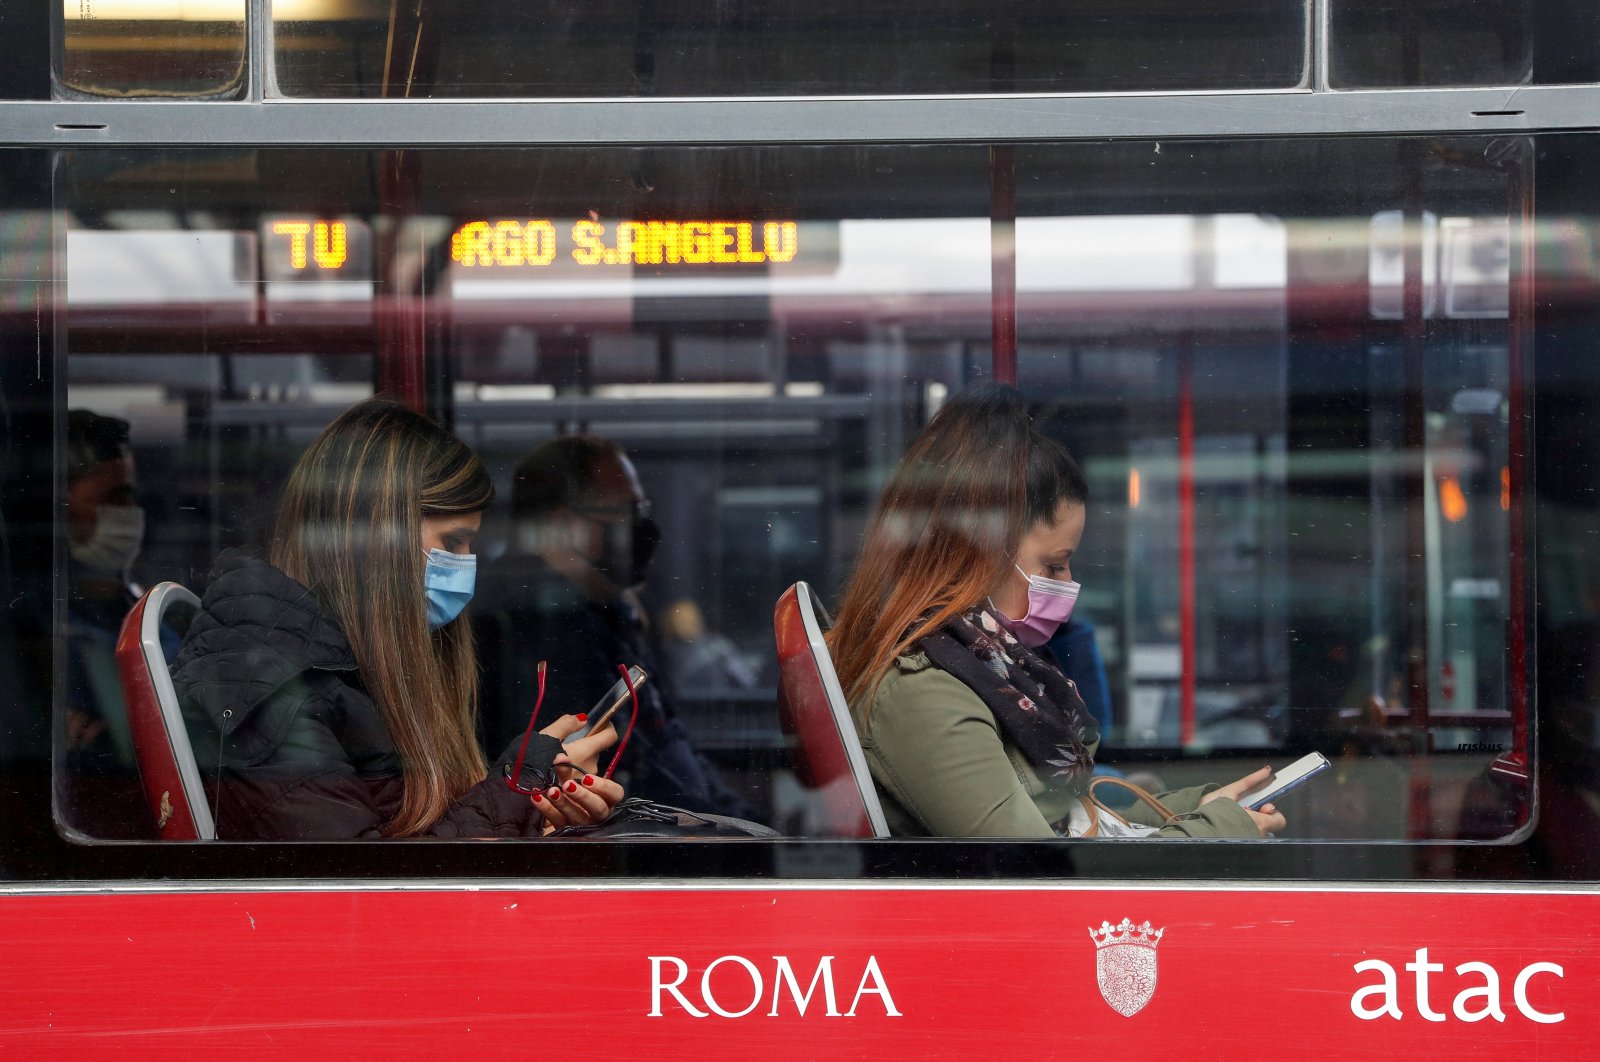 Passengers wearing protective face masks travel on a bus, Rome, Oct. 15, 2020. (Reuters Photo)